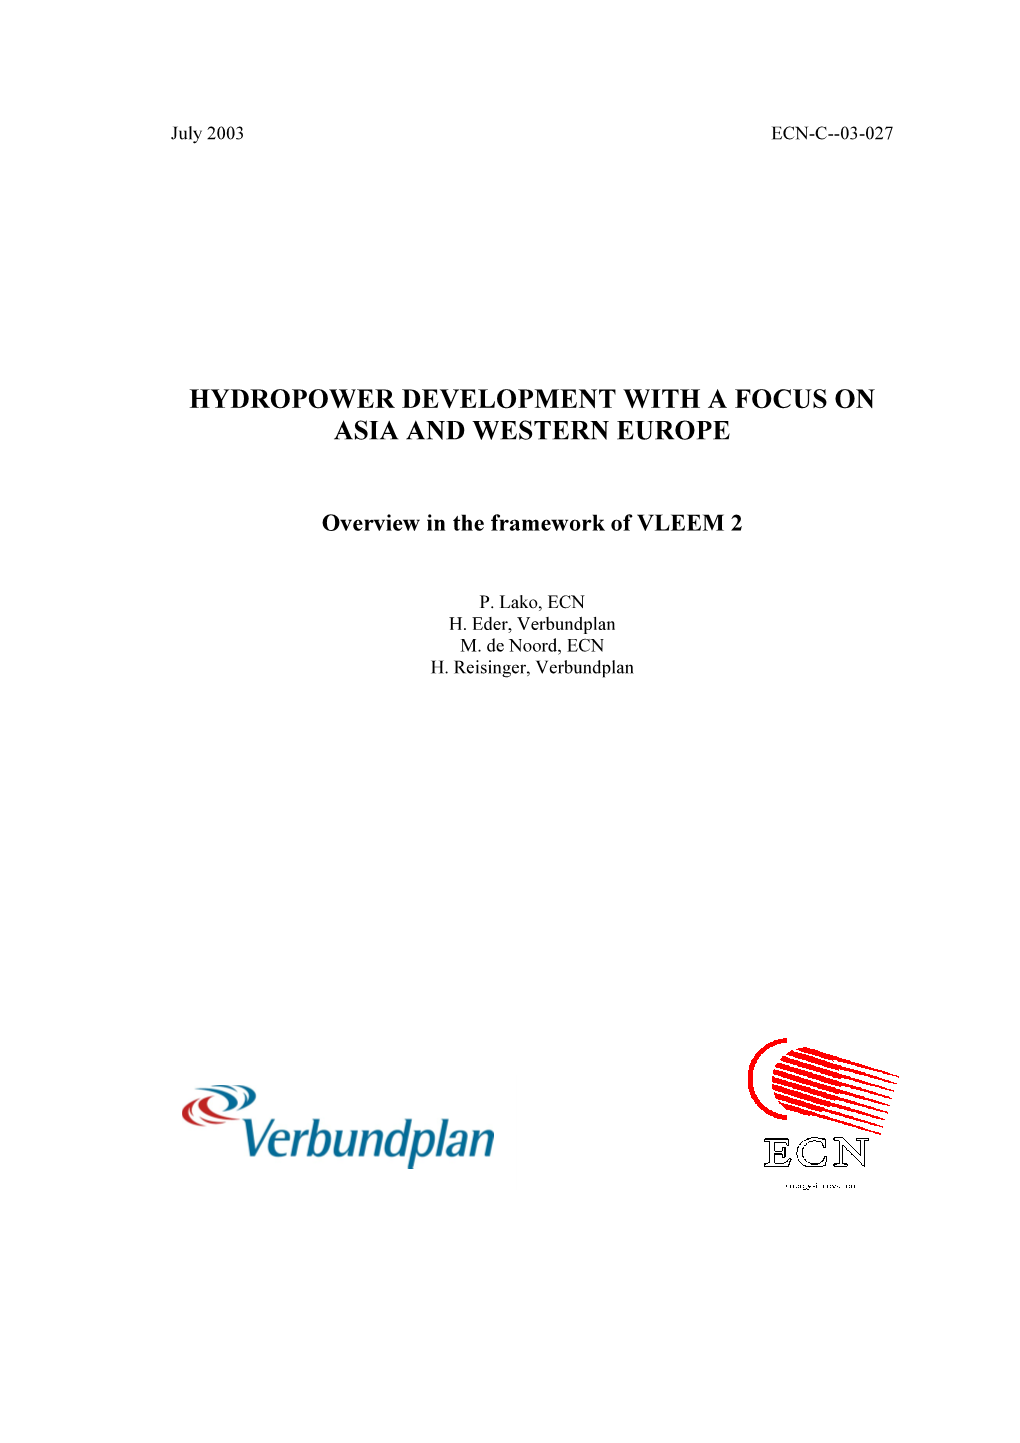 Hydropower Development with a Focus on Asia and Western Europe